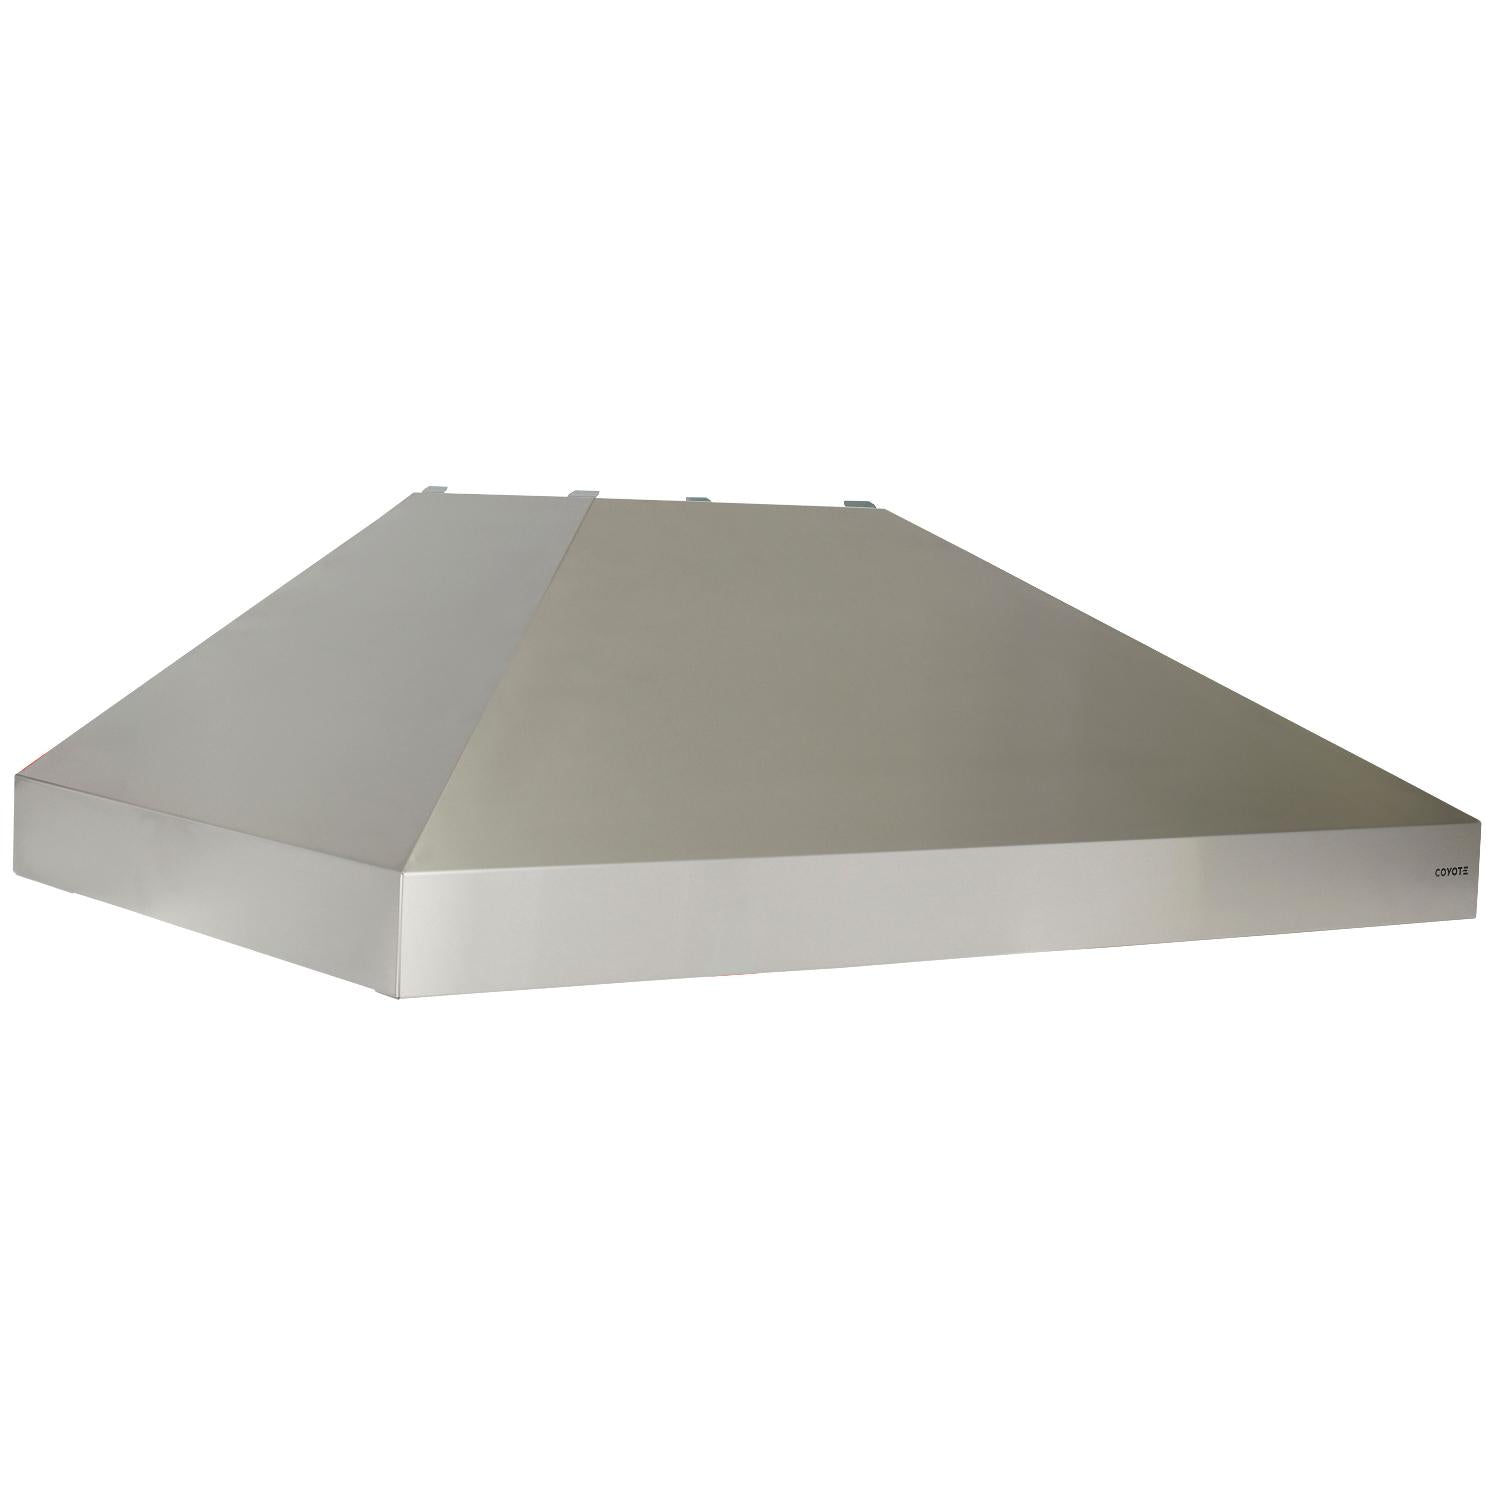 Coyote 48-Inch Stainless Steel Outdoor Vent Hood